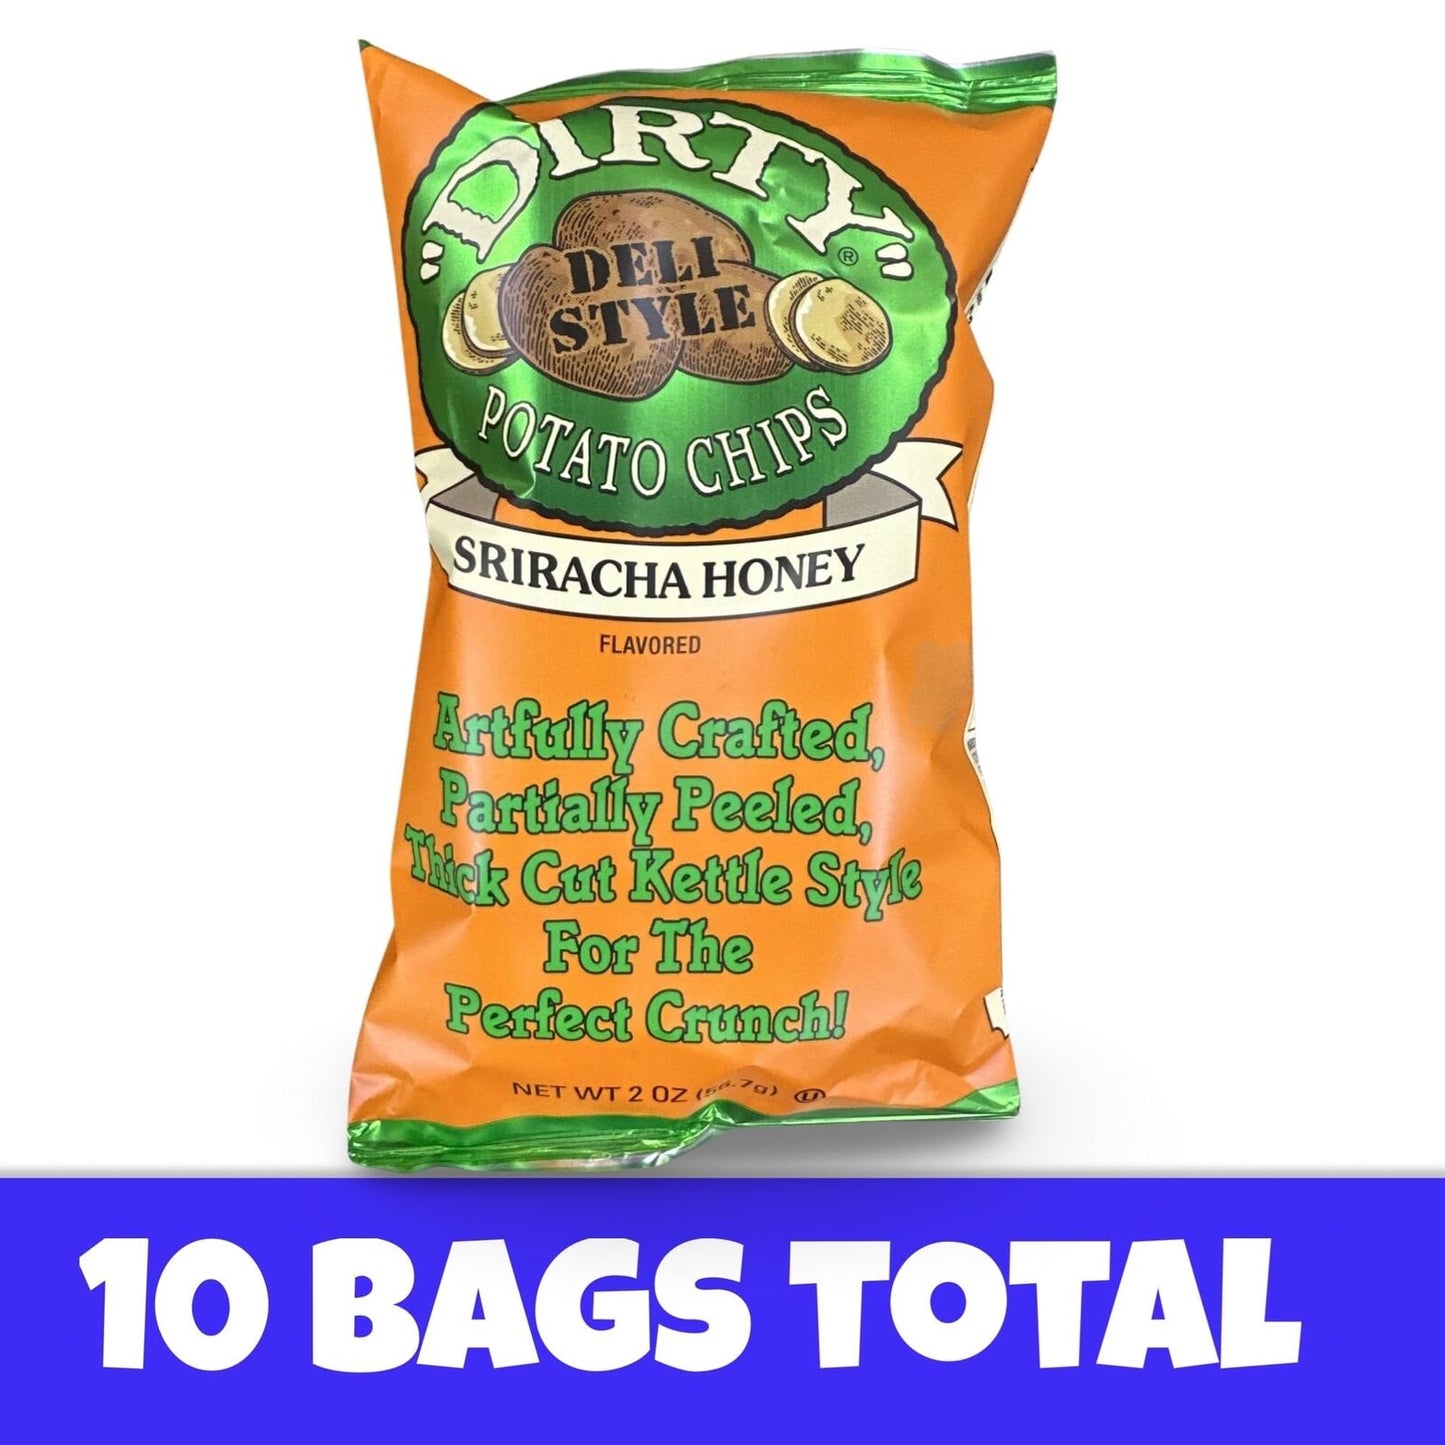 Deli Style Potato Chips Value Pack | Bundled by Tribeca Curations, Sriracha